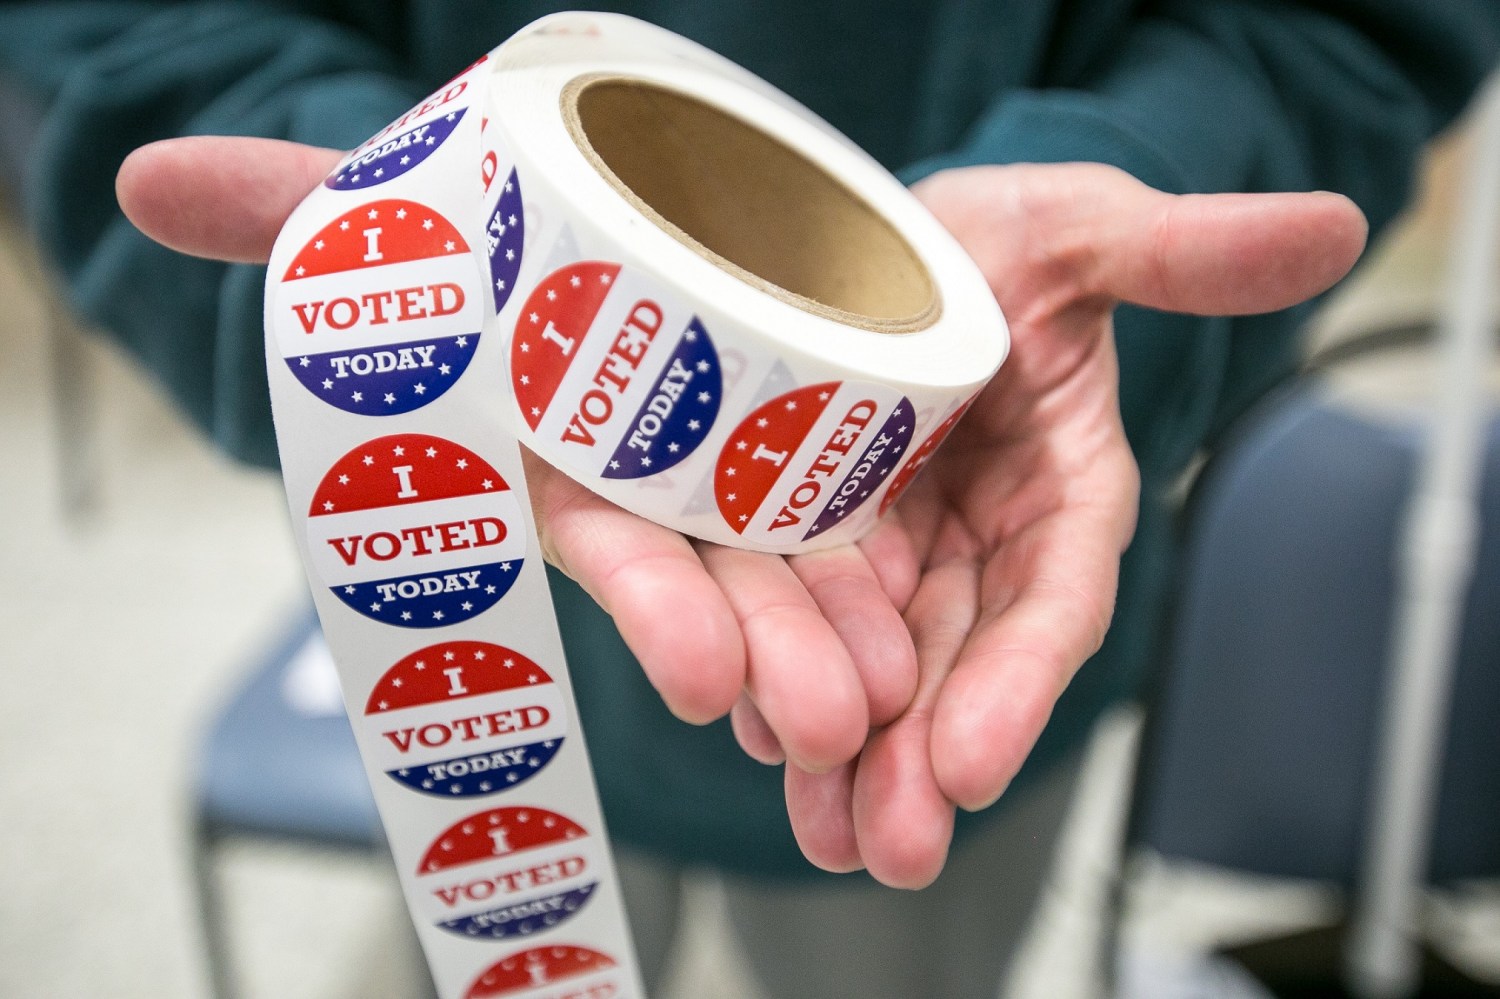 Mar 17, 2020; Rockford, IL, USA;  First time election judge Steve Ateca holds a spool of voting stickers next to the ballot box at St. Bernadette Catholic Church in Rockford, Ill., Tuesday, March 17, 2020. Mandatory Credit: Scott P. Yates/Rockford Register Star via USA TODAY NETWORK